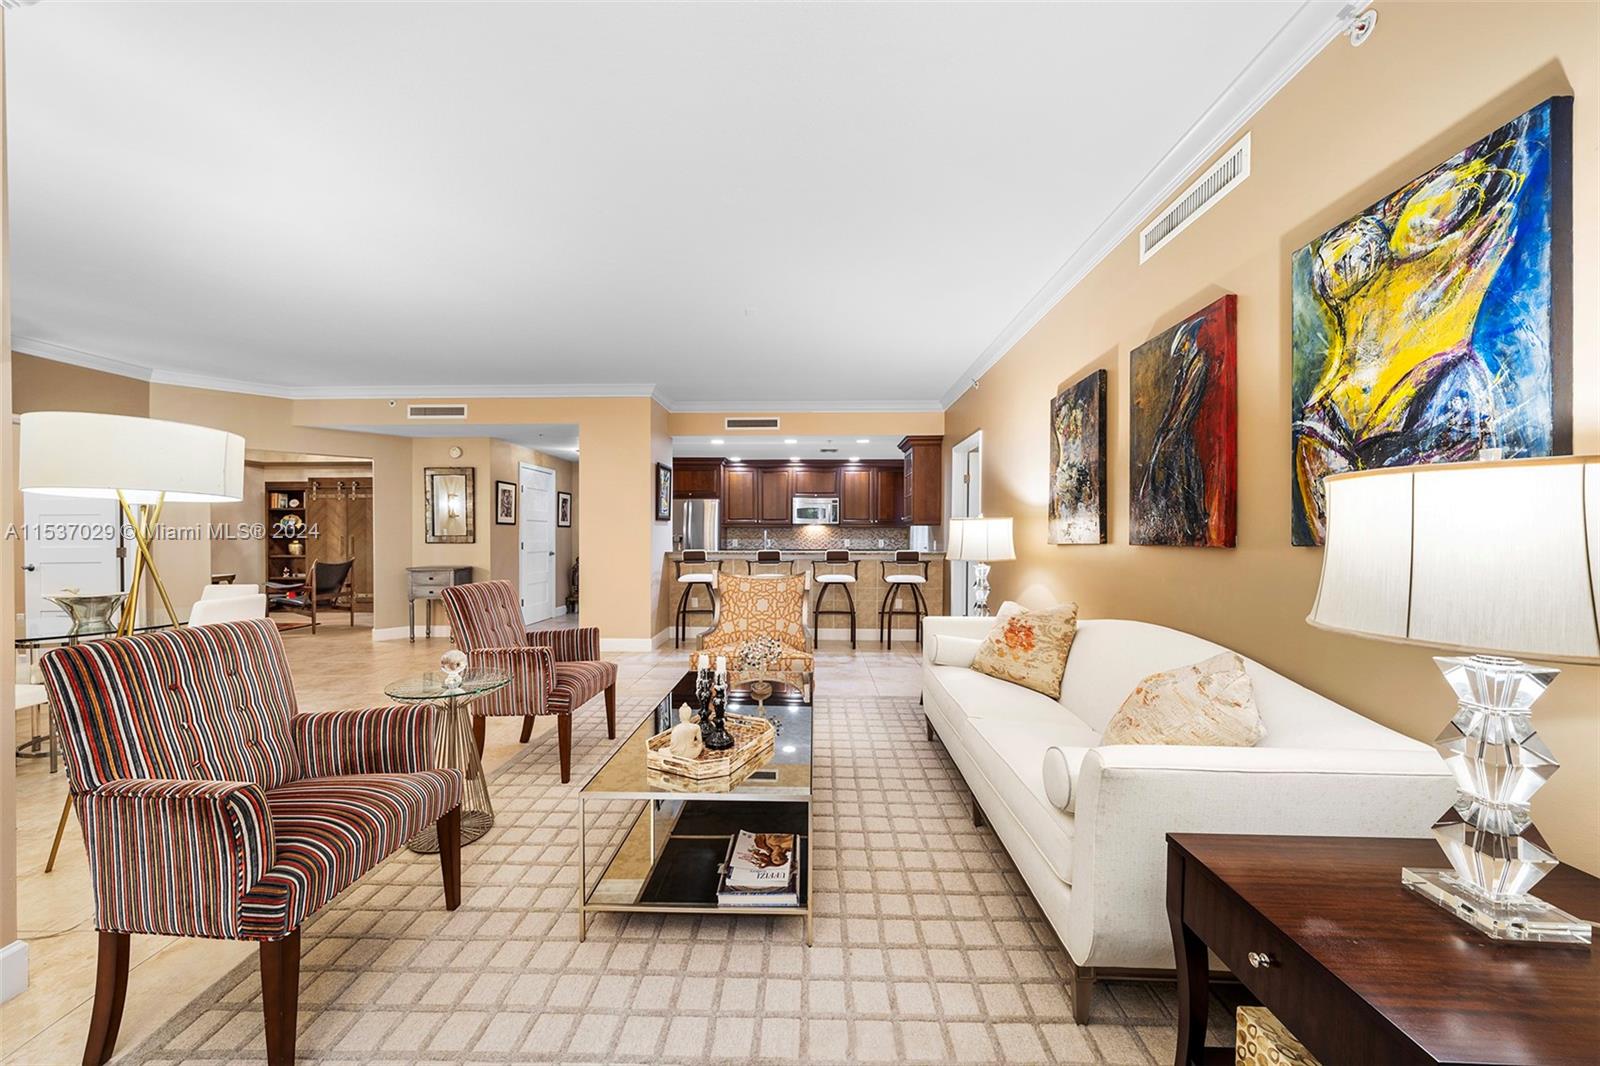 Right in the heart of vibrant downtown Coral Gables sits this oversized impeccably maintained crisp and inviting condo. With 3 beds/3.5 baths PLUS a den/office, this double unit offers a smart and open layout with split floor plan, two primary suites, volume ceilings, impact glass, and dual balconies overlooking lush greenery and soothing fountains. This unit comes with 3 parking spaces (2 assigned) and building amenities include fitness room, 24-hr security, secured lobby with doorman, club room, and billiard room. The perfect combination of your own private retreat amidst a bustling cityscape just steps from Miracle Mile!